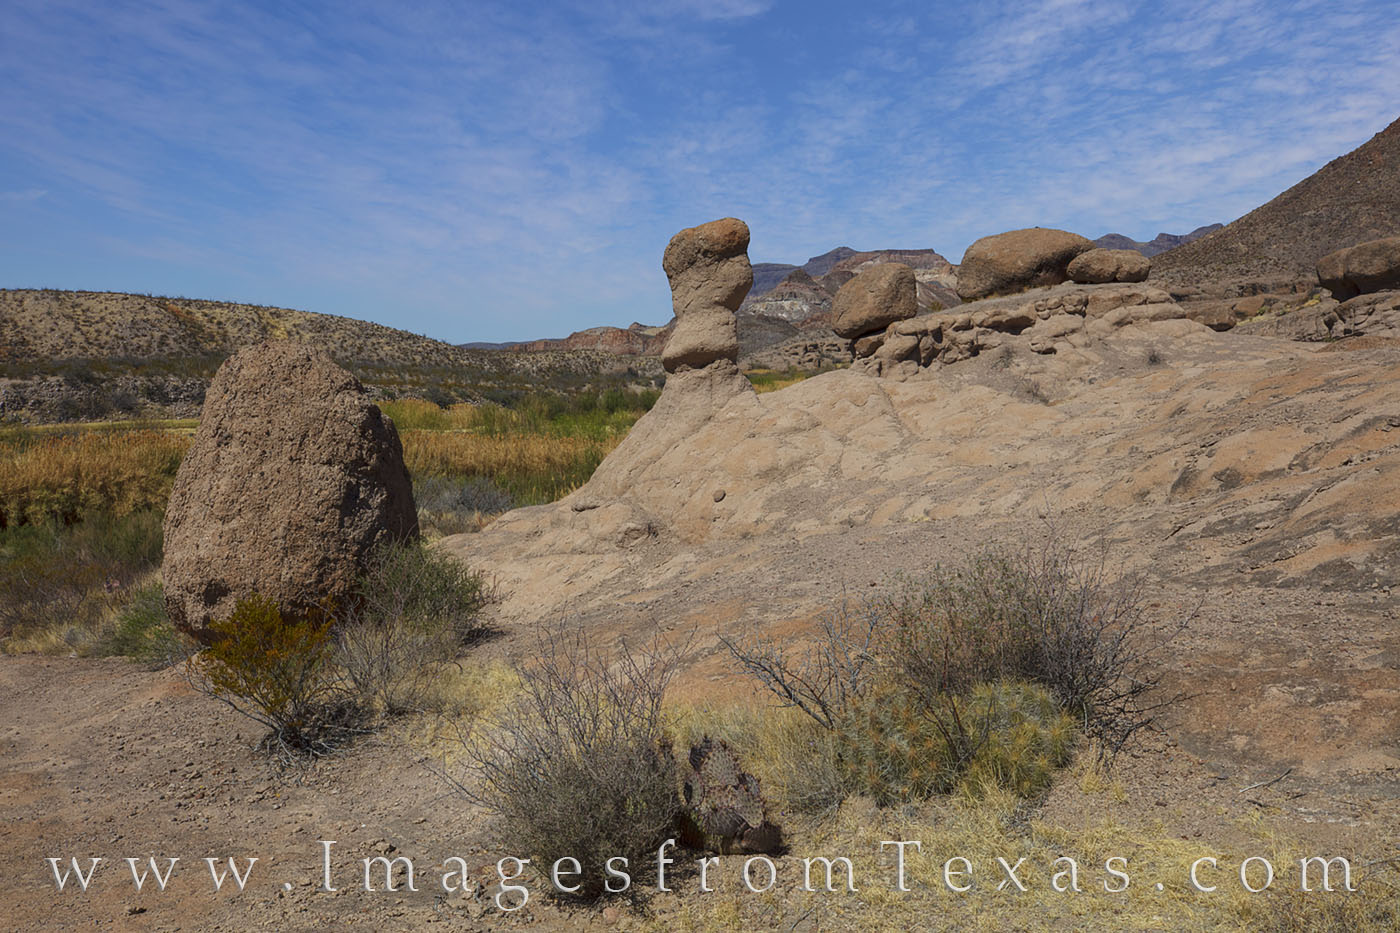 Along FM 170 in Big Bend Ranch State Park, the Hoodoo Trail offers a nice place to explore and see some amazing rock formations...